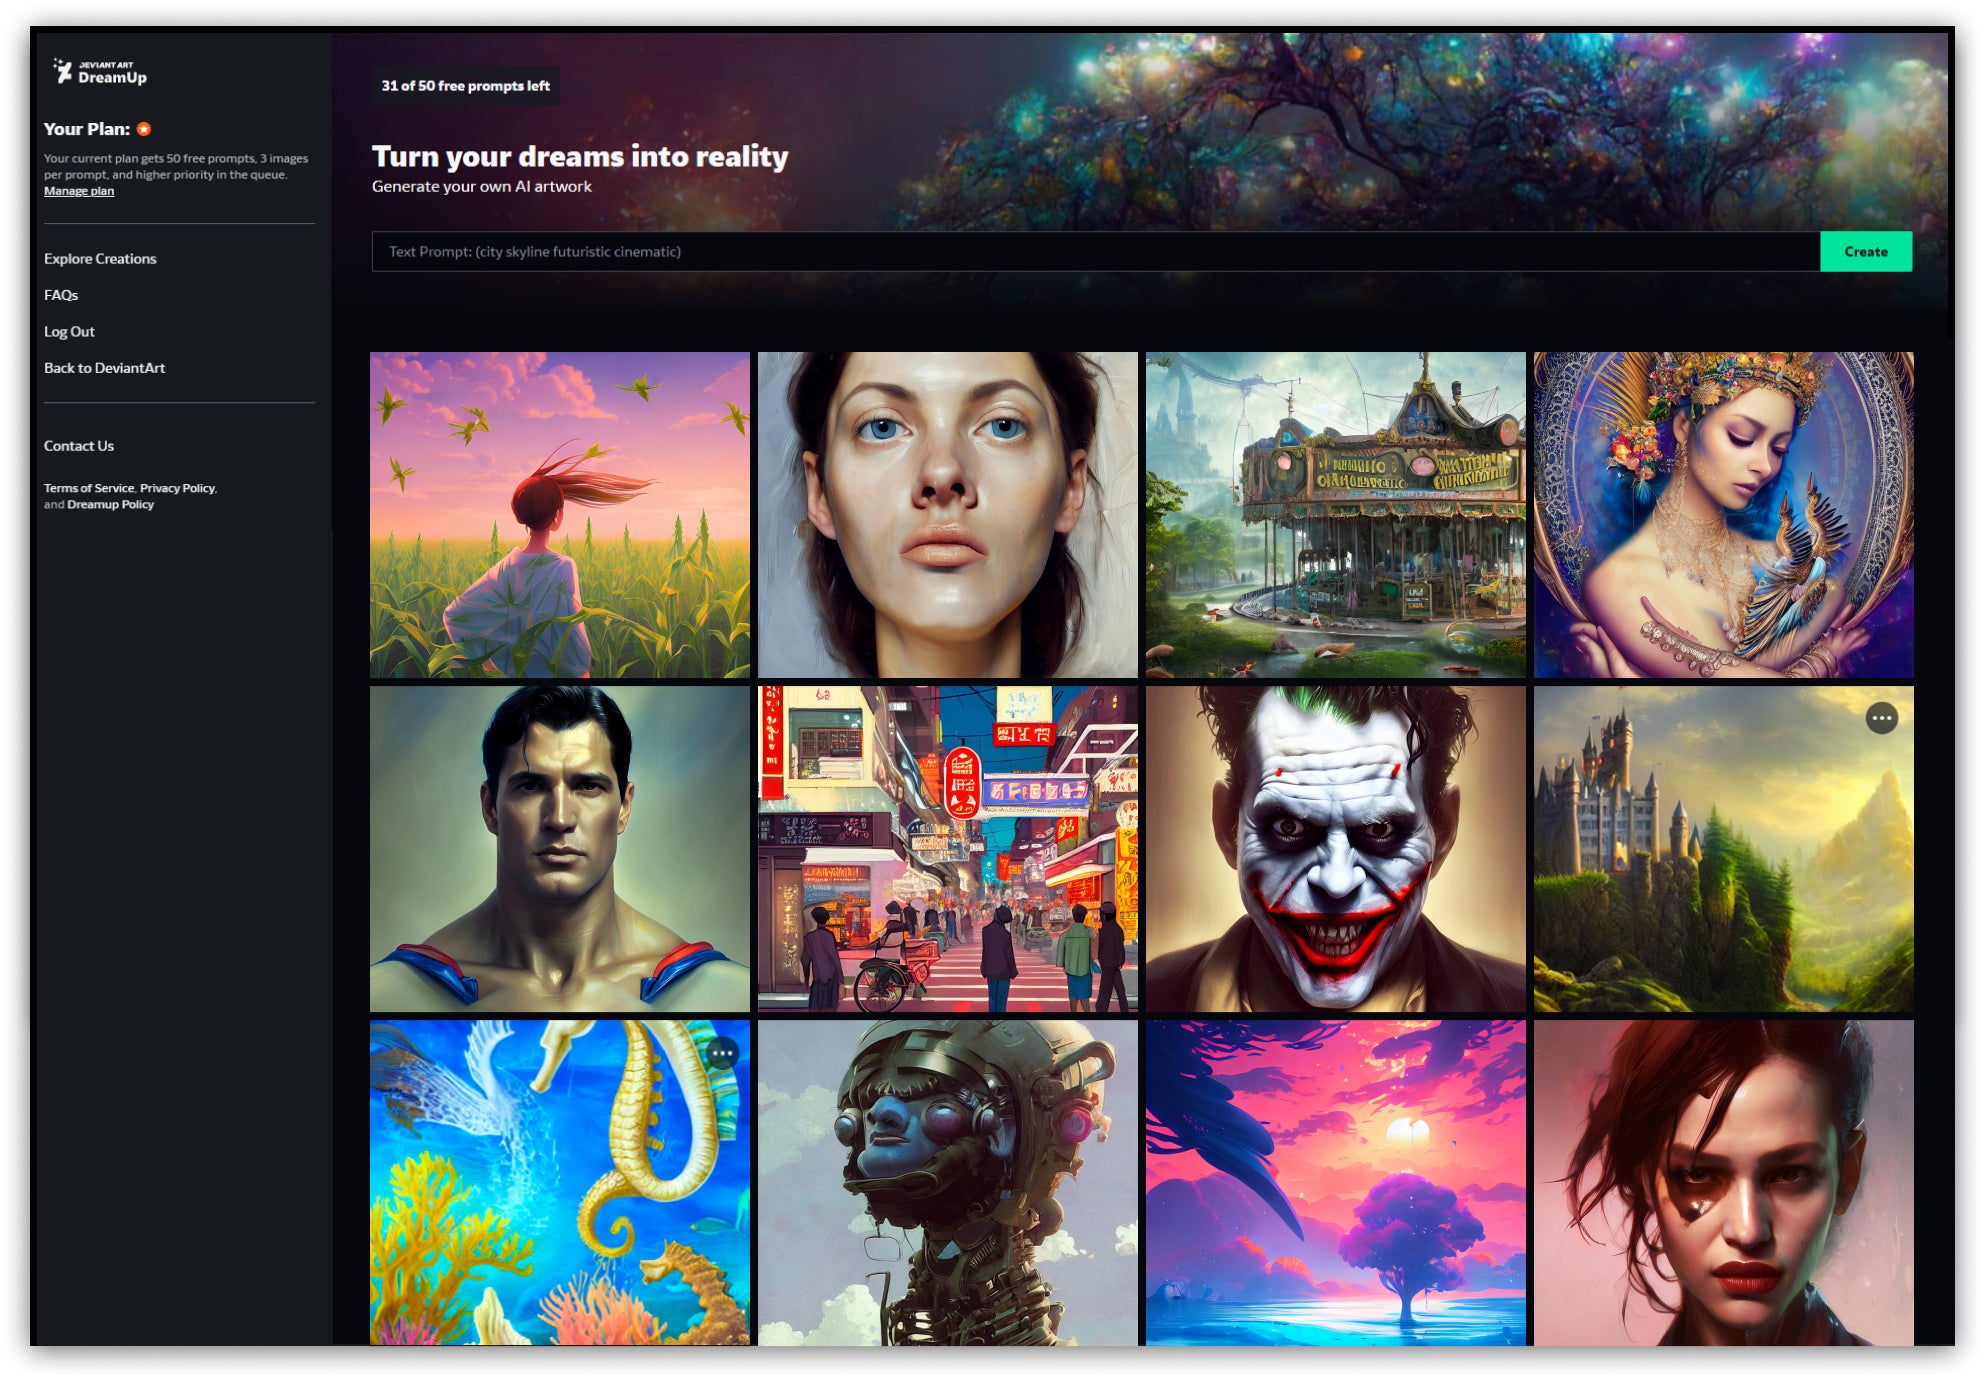 What the DreamUp app will look on the main page. (Image: DeviantArt)